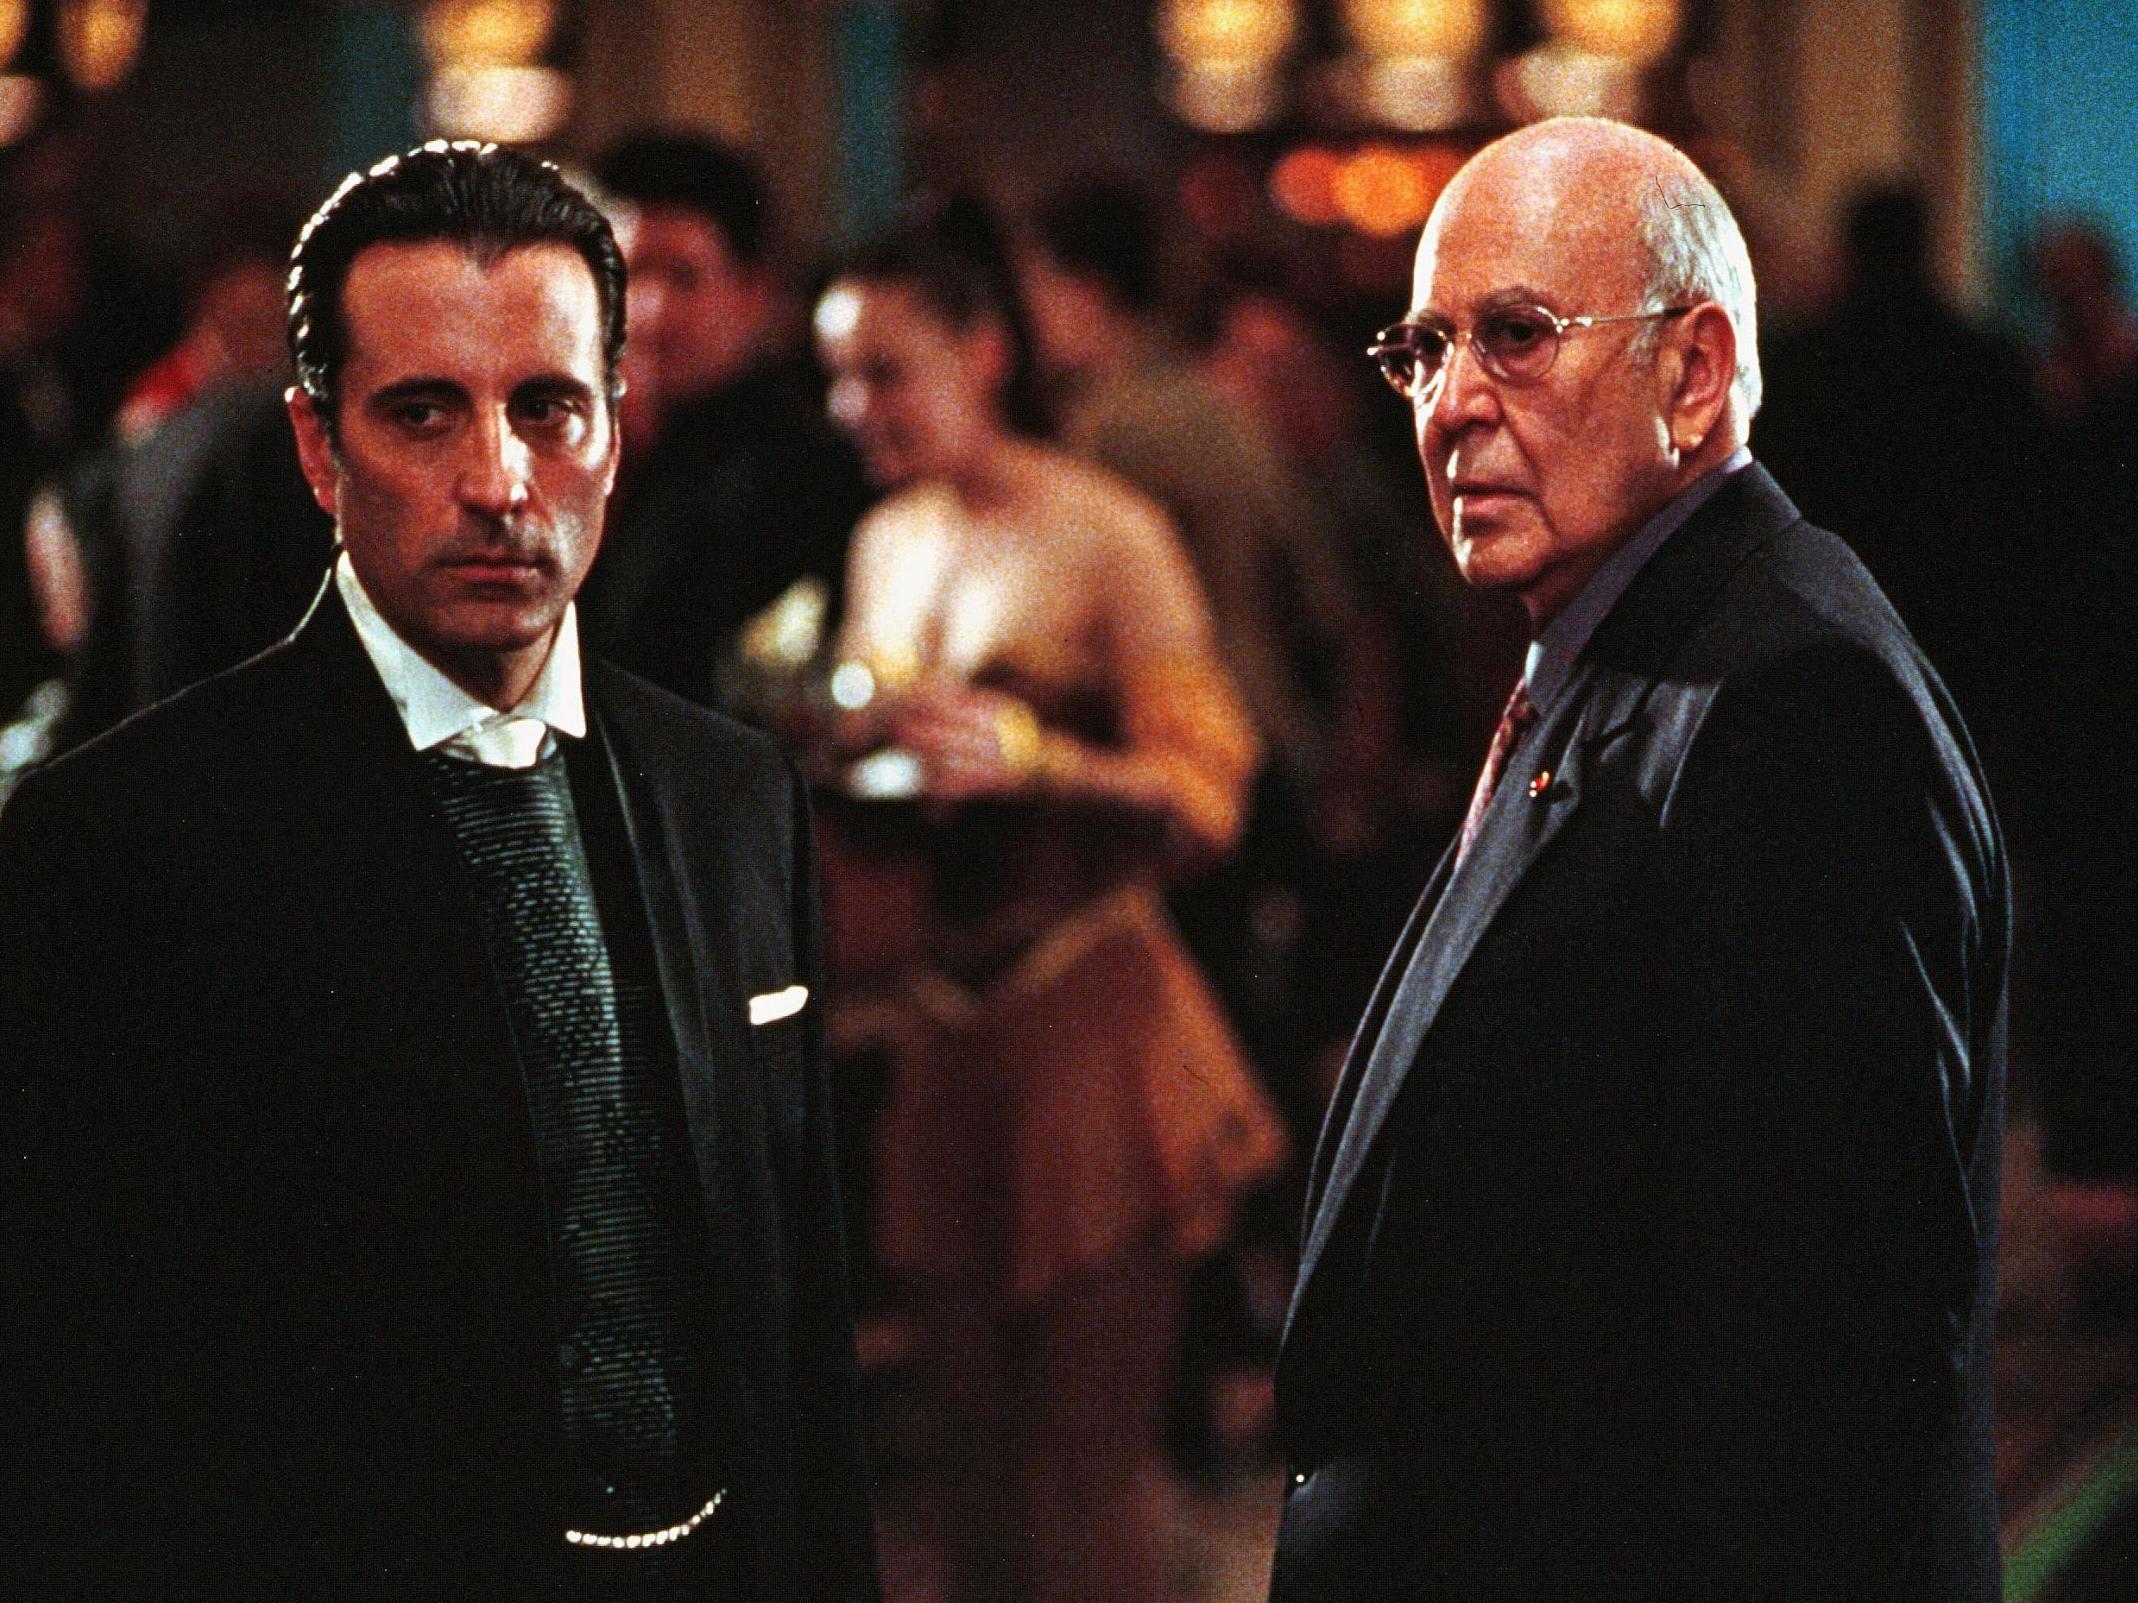 In ‘Ocean’s Eleven’ with Andy Garcia, 2001